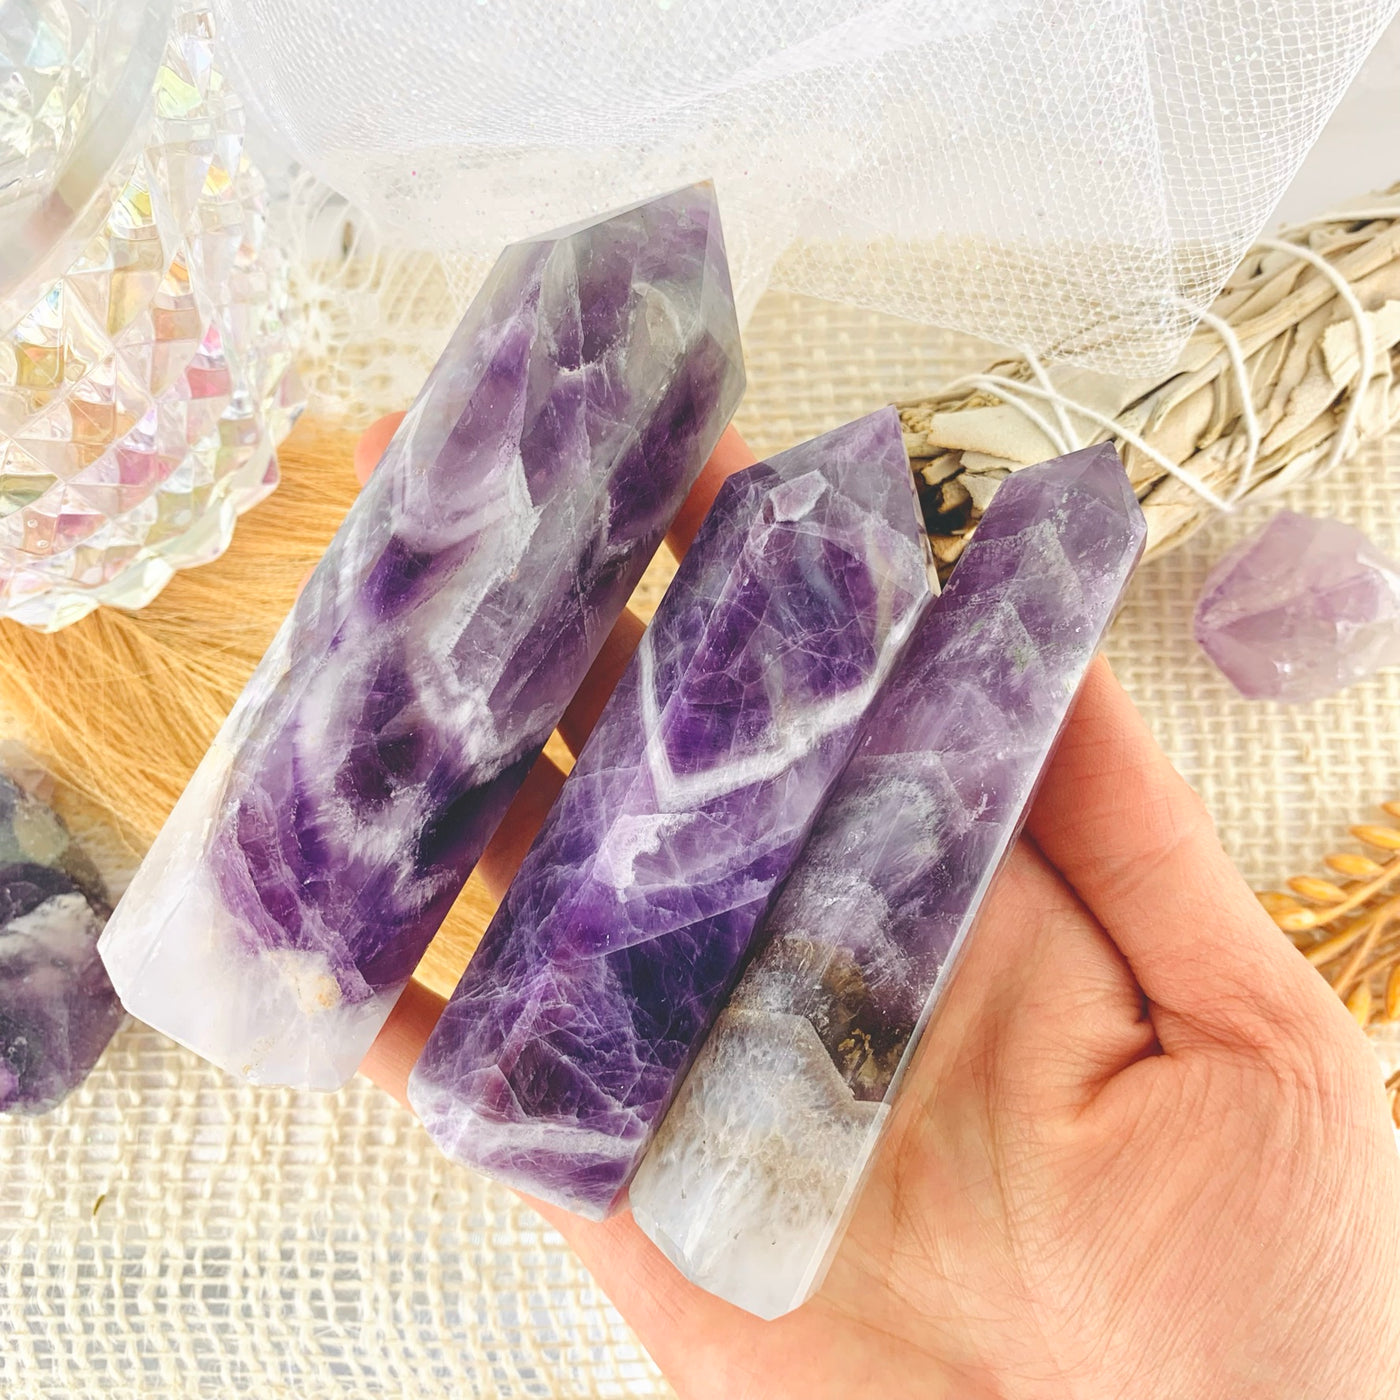 Amethyst Healing Crystal Towers Obelisks For Money, Protection, Love, Strength